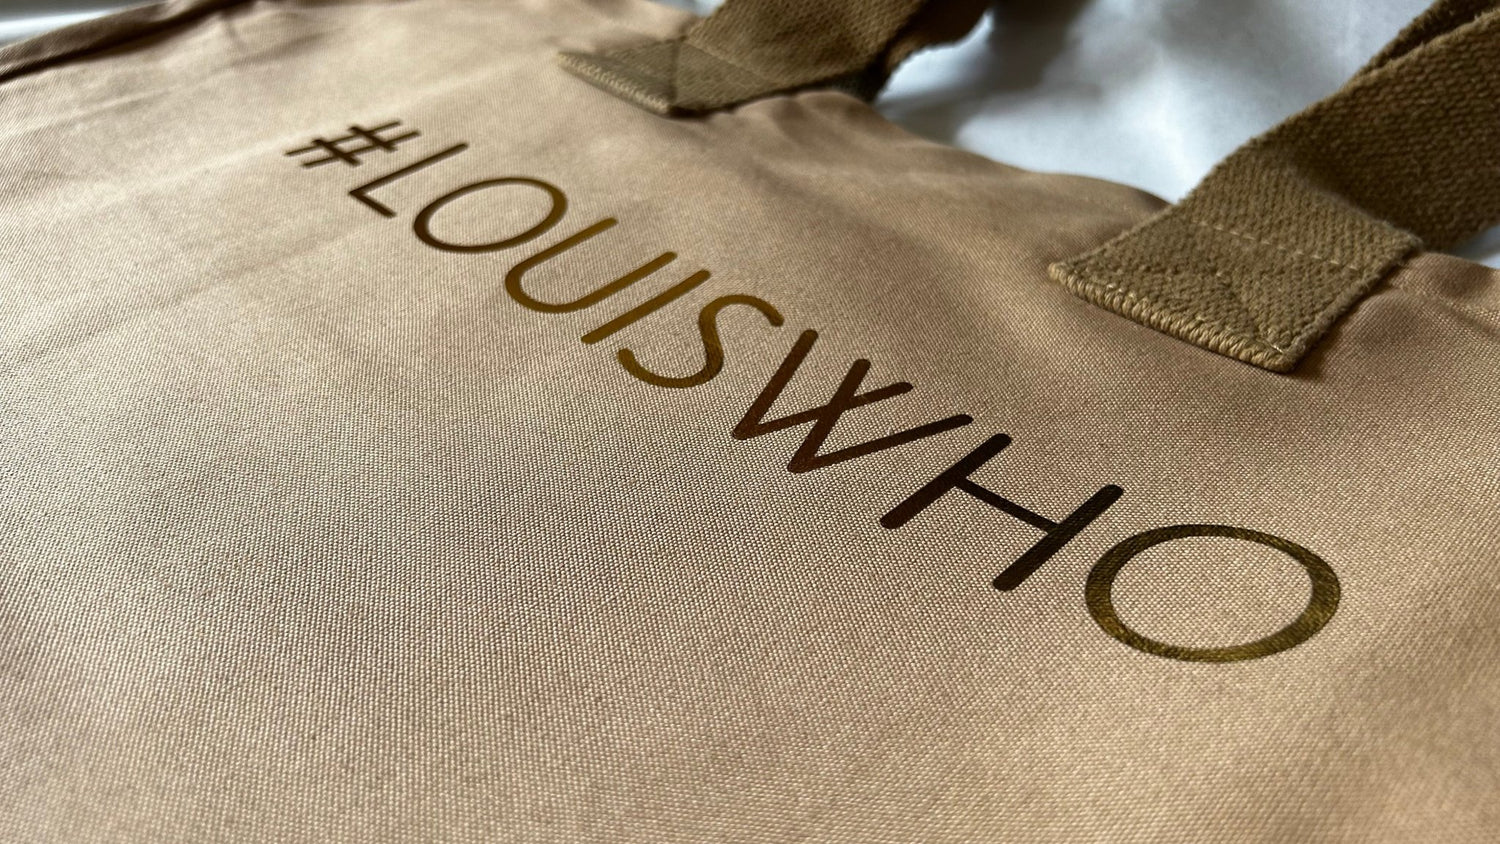 #Louisewho Tote - Expressive Cherry